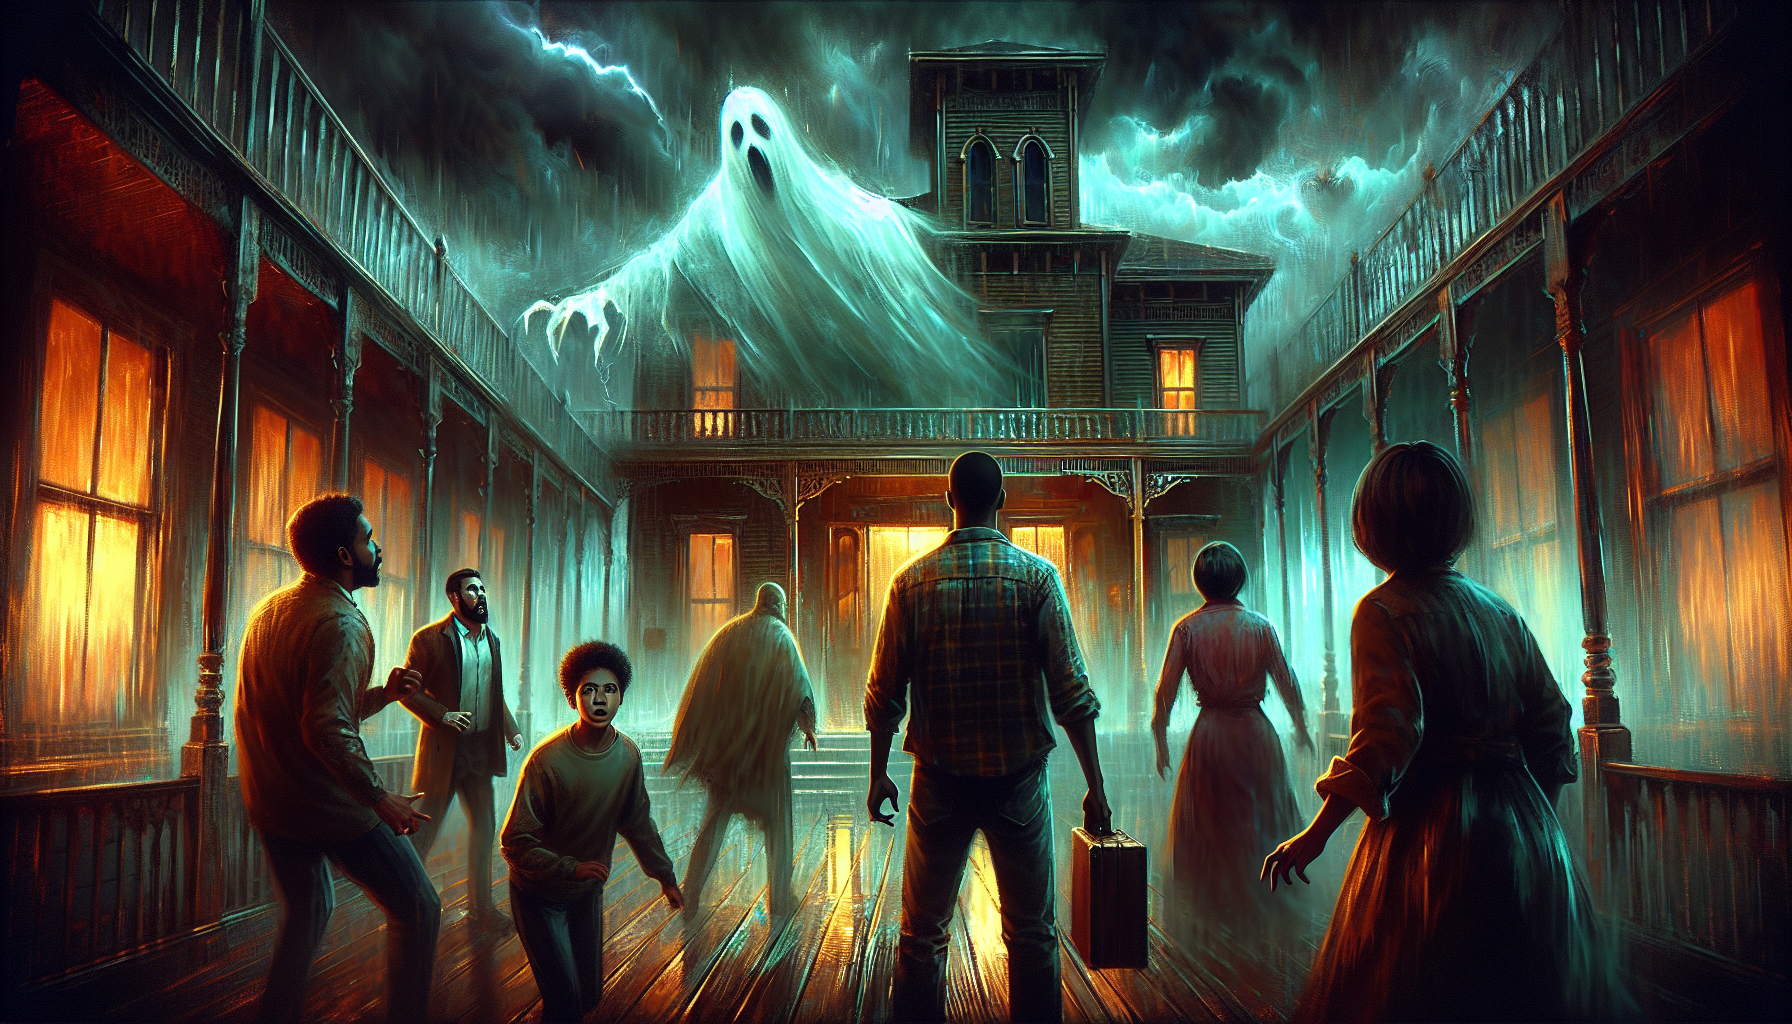 Create a moody, atmospheric digital painting of a climactic scene in a horror movie, featuring a suspenseful confrontation between a small group of survivors and a terrifying spectral entity in a decr